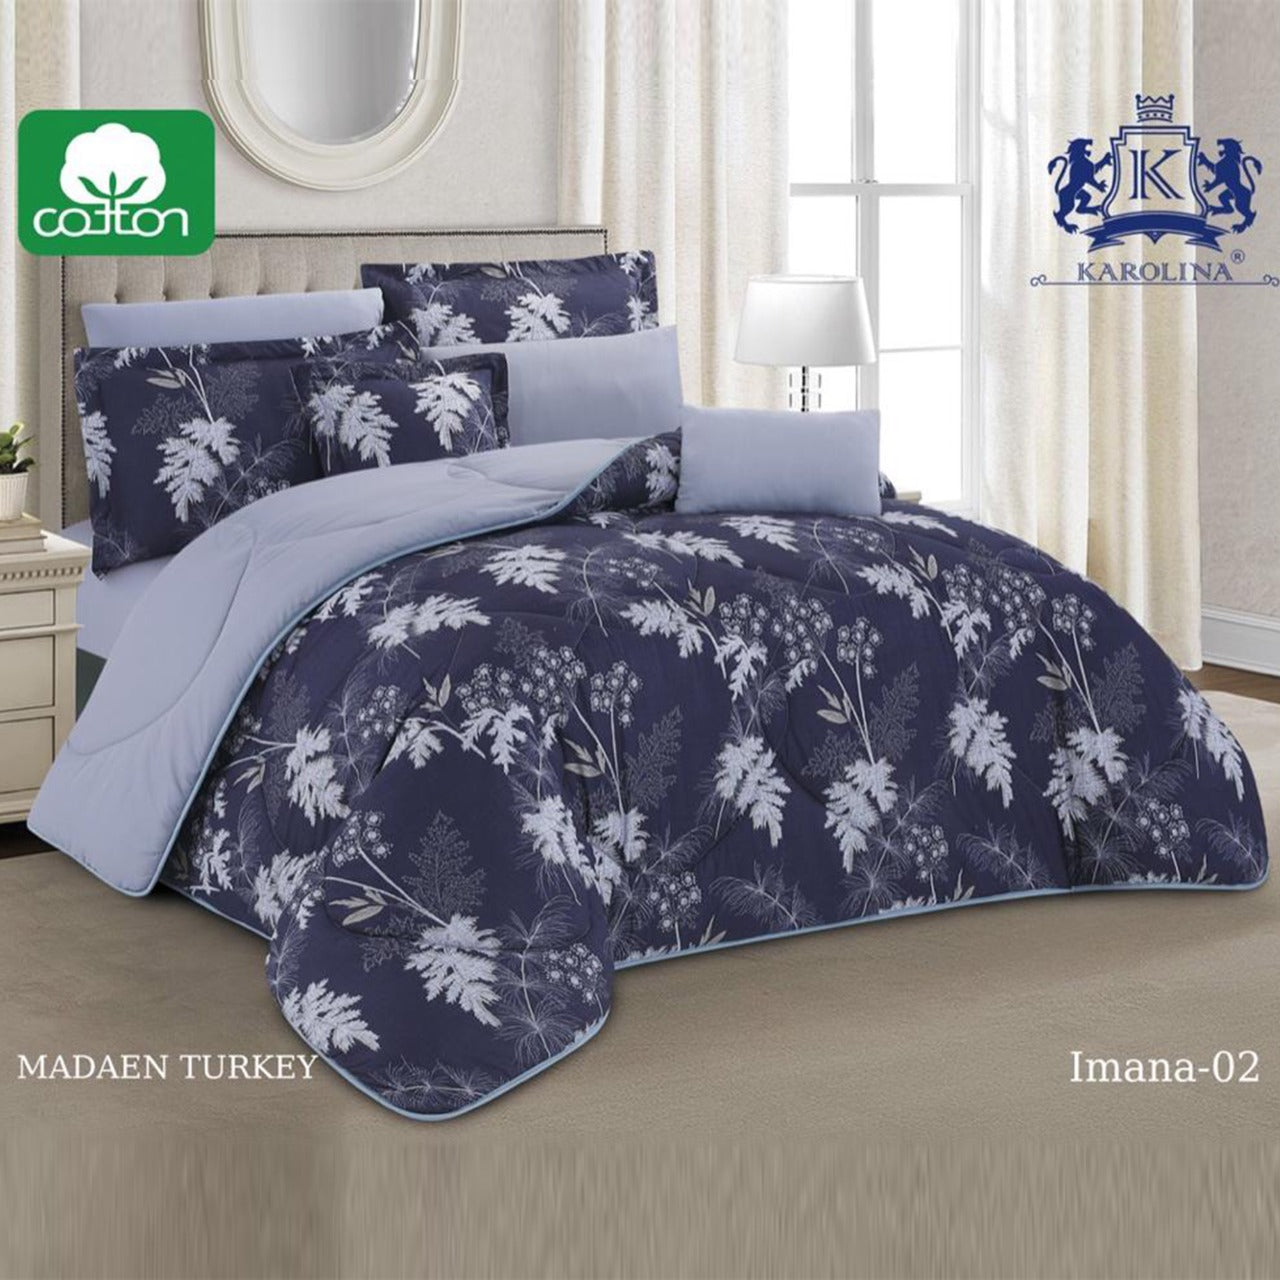 10 Piece Comforter Bedding With Sheet and Decorative Pillow Shams | Made in Turkey Imana-02 Zaappy